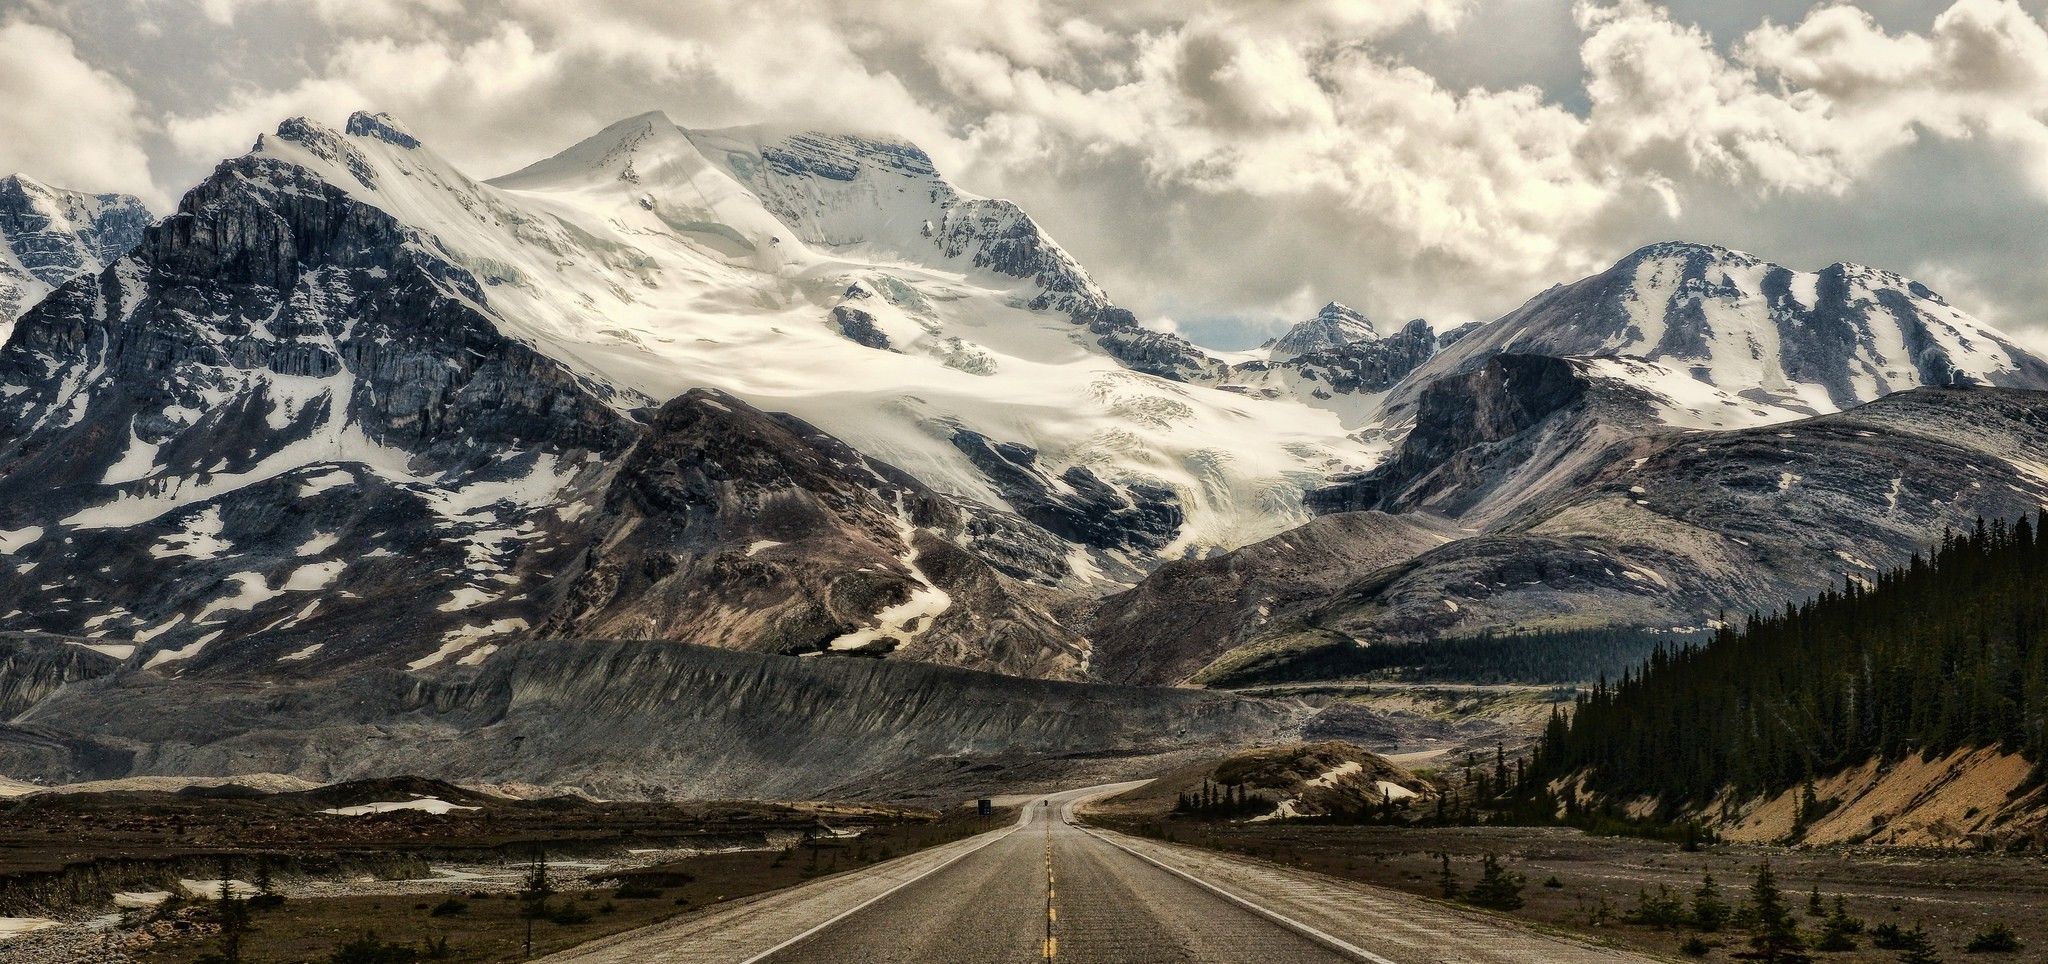 nature, Landscape, Mountains, Road, Panoramas, Snowy Peak, Clouds